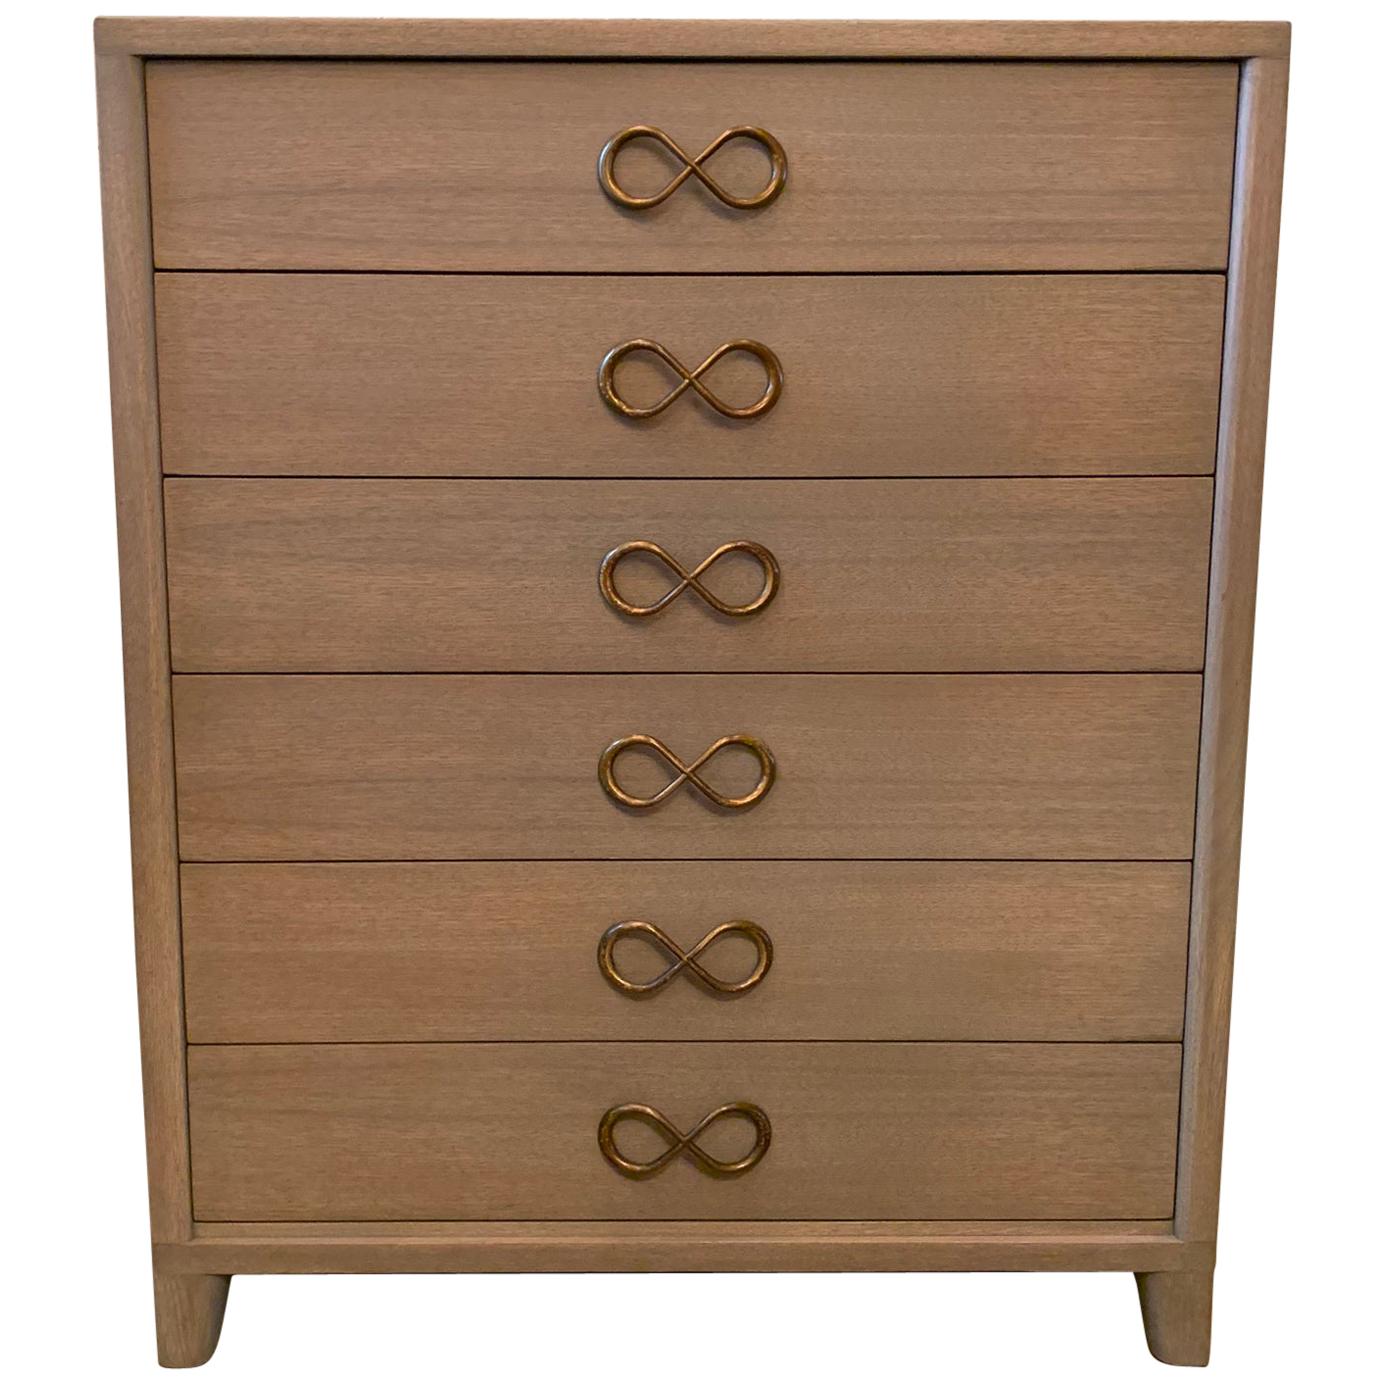 Midcentury Pickled Mahogany Highboy Dresser by Red Lion